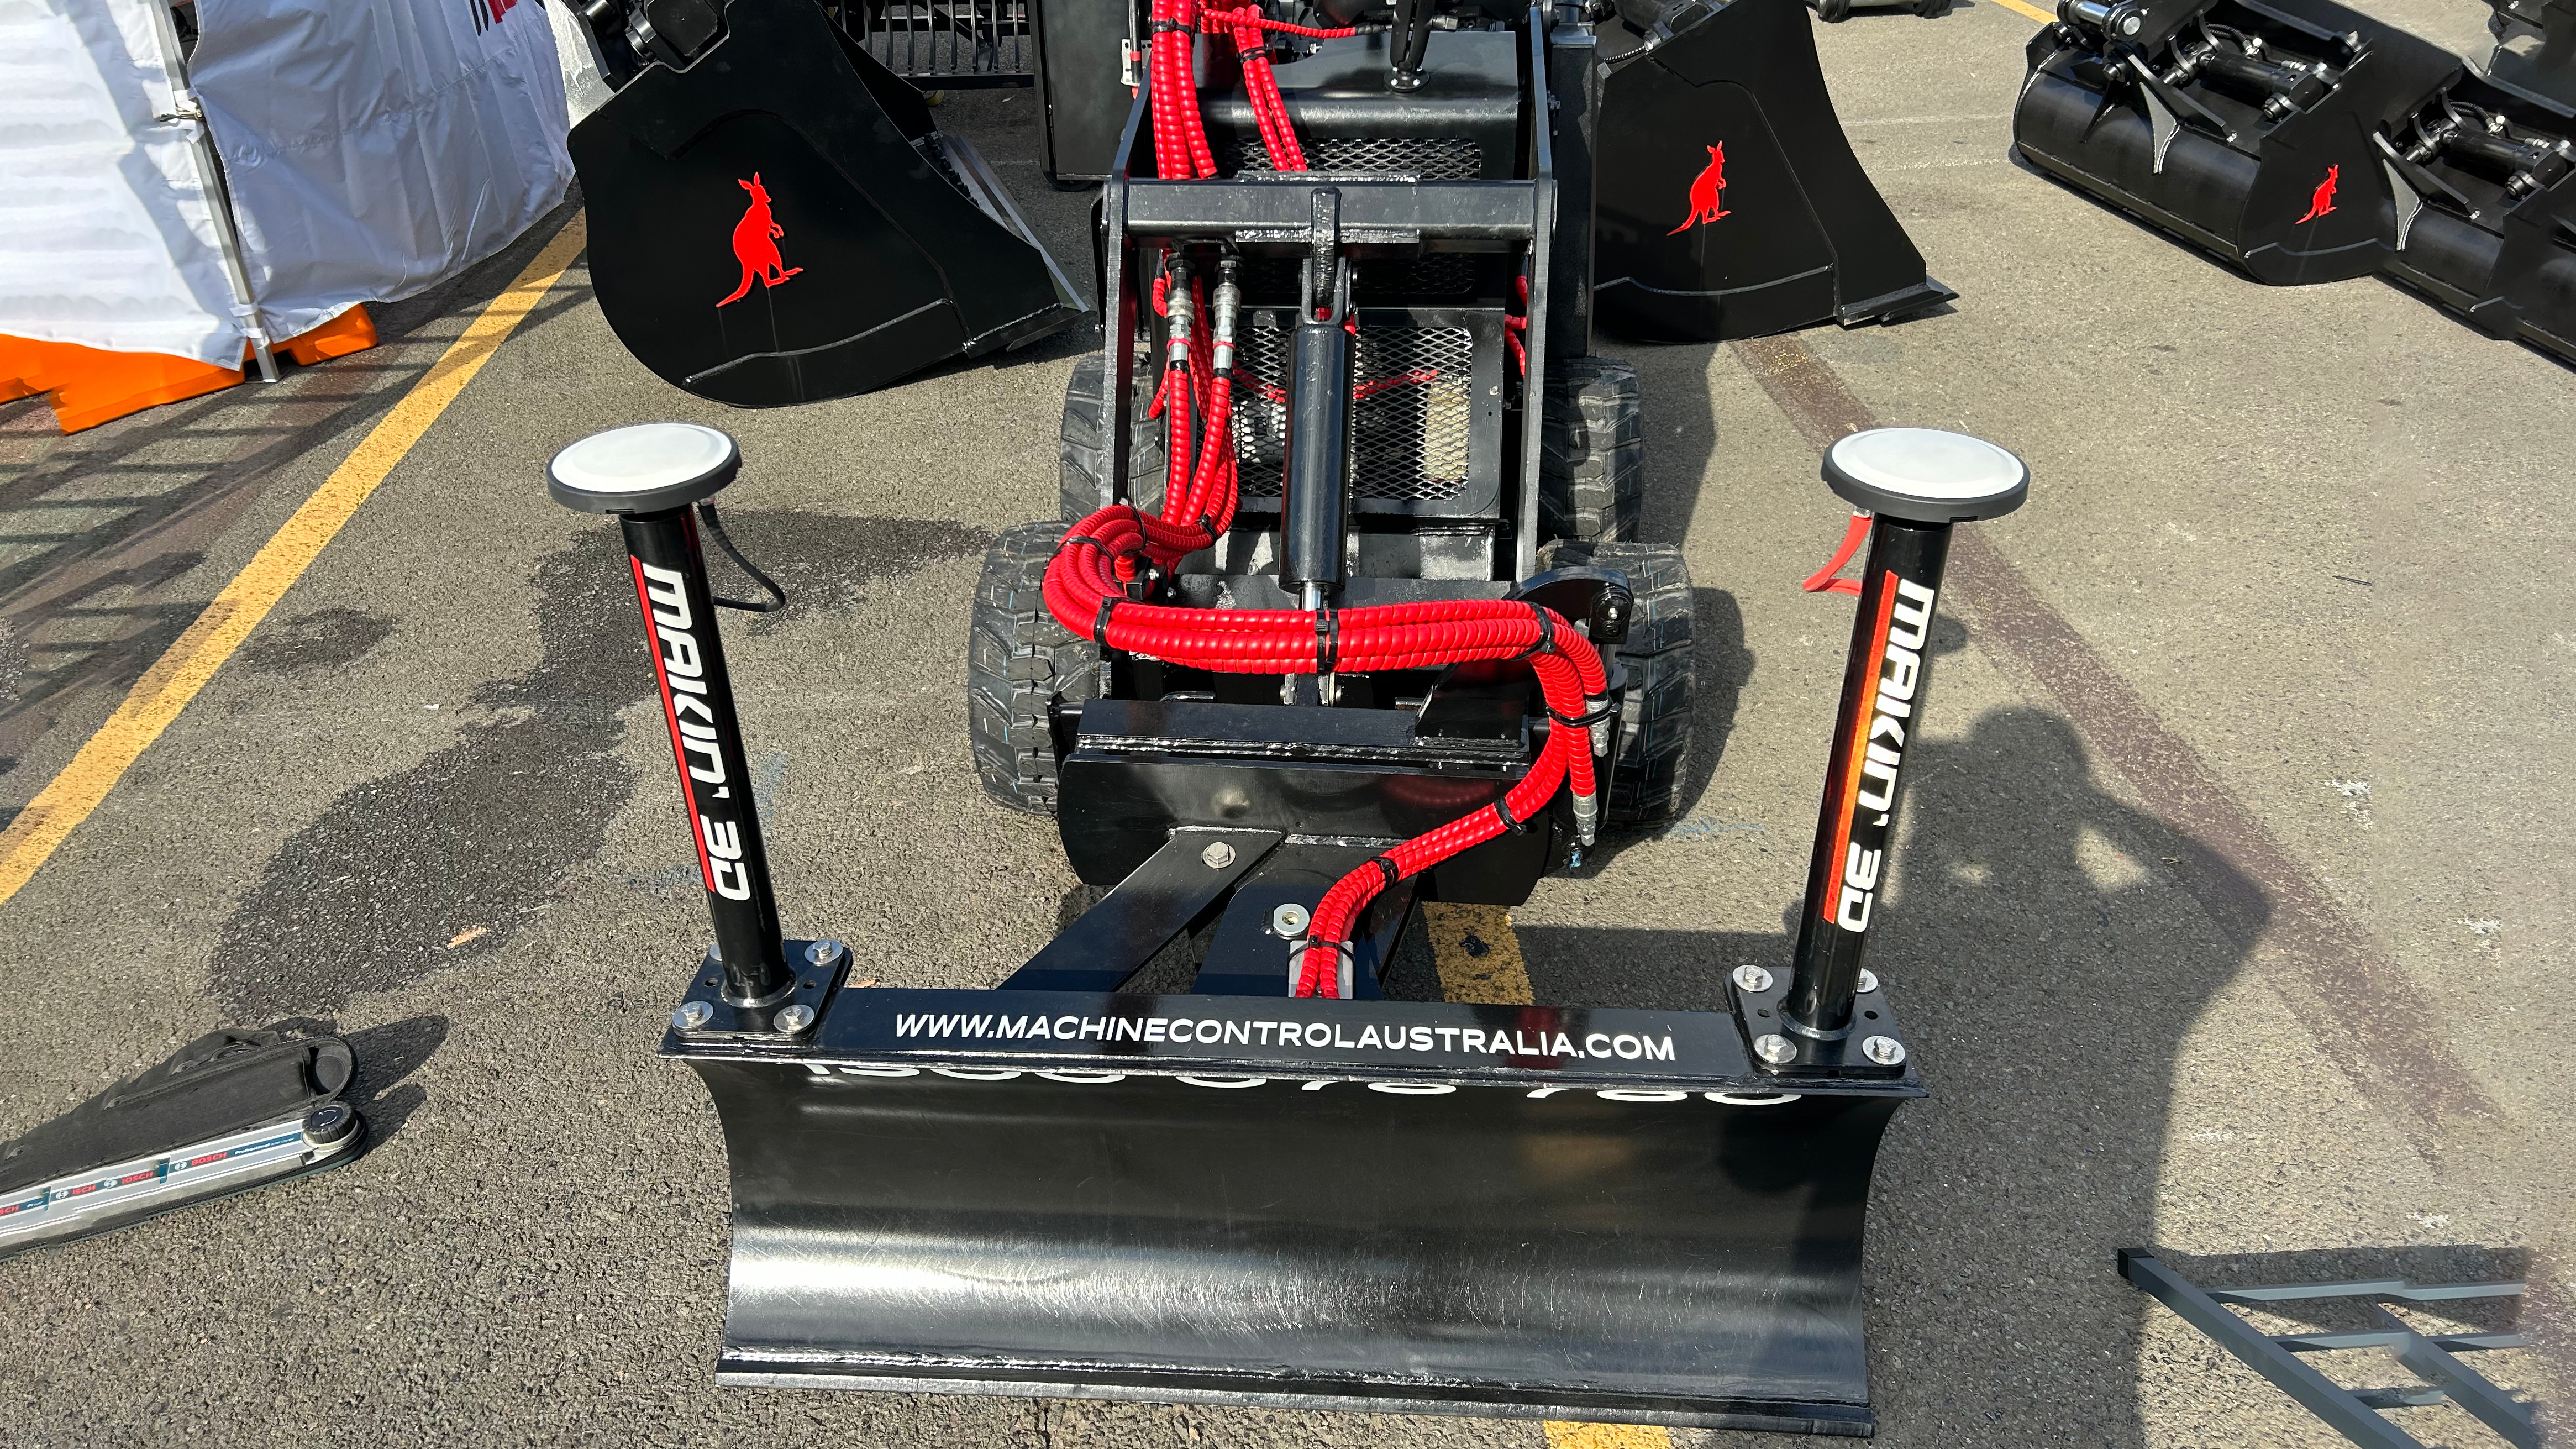 Tool Guidance installed on a skid steer machine